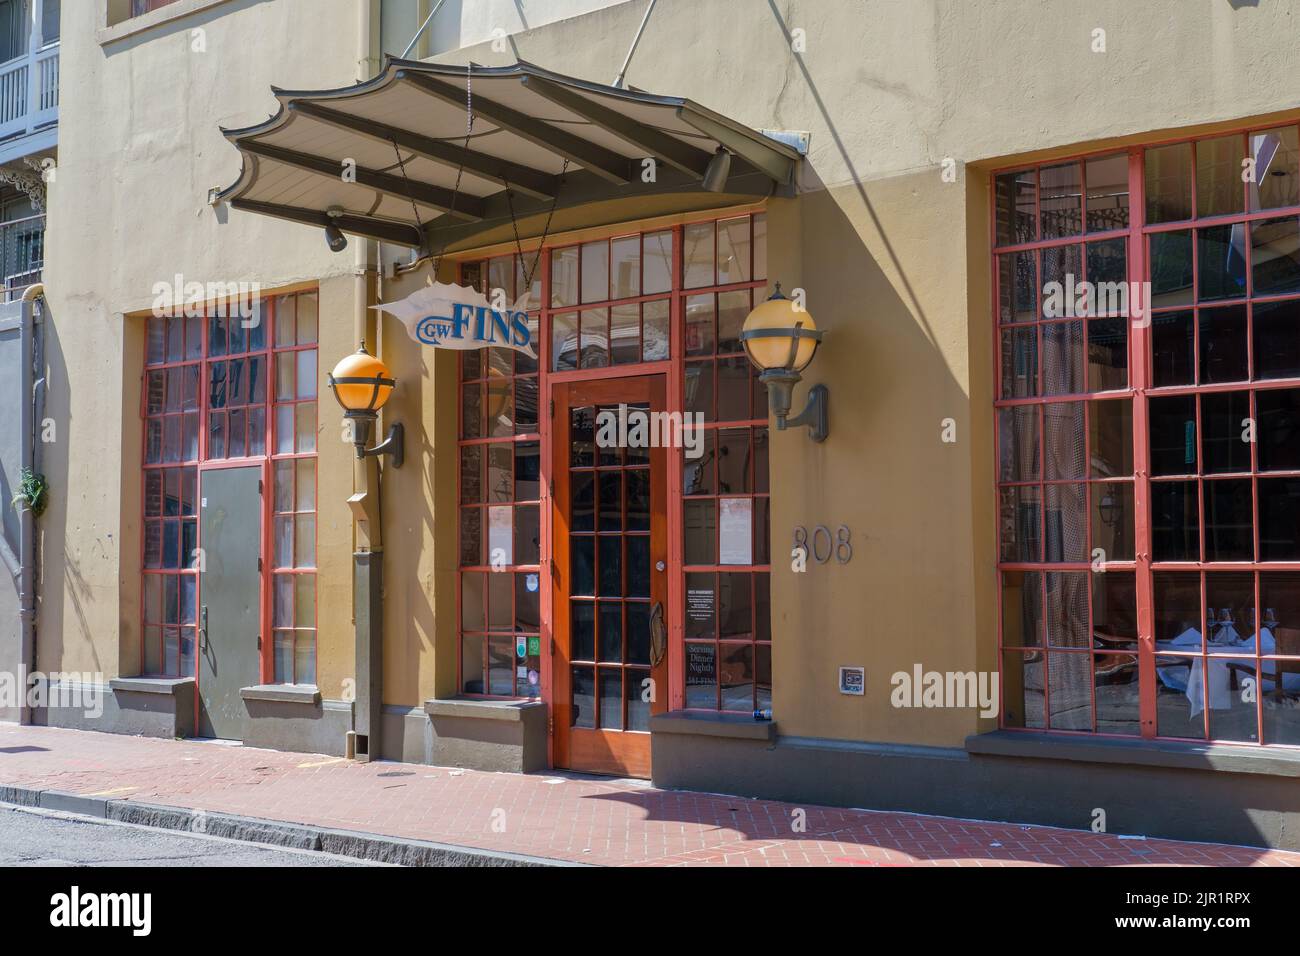 NEW ORLEANS, LA, USA - AUGUST 20, 2022: Front of G.W. Fins Restaurant on Bienville Street in the French Quarter Stock Photo